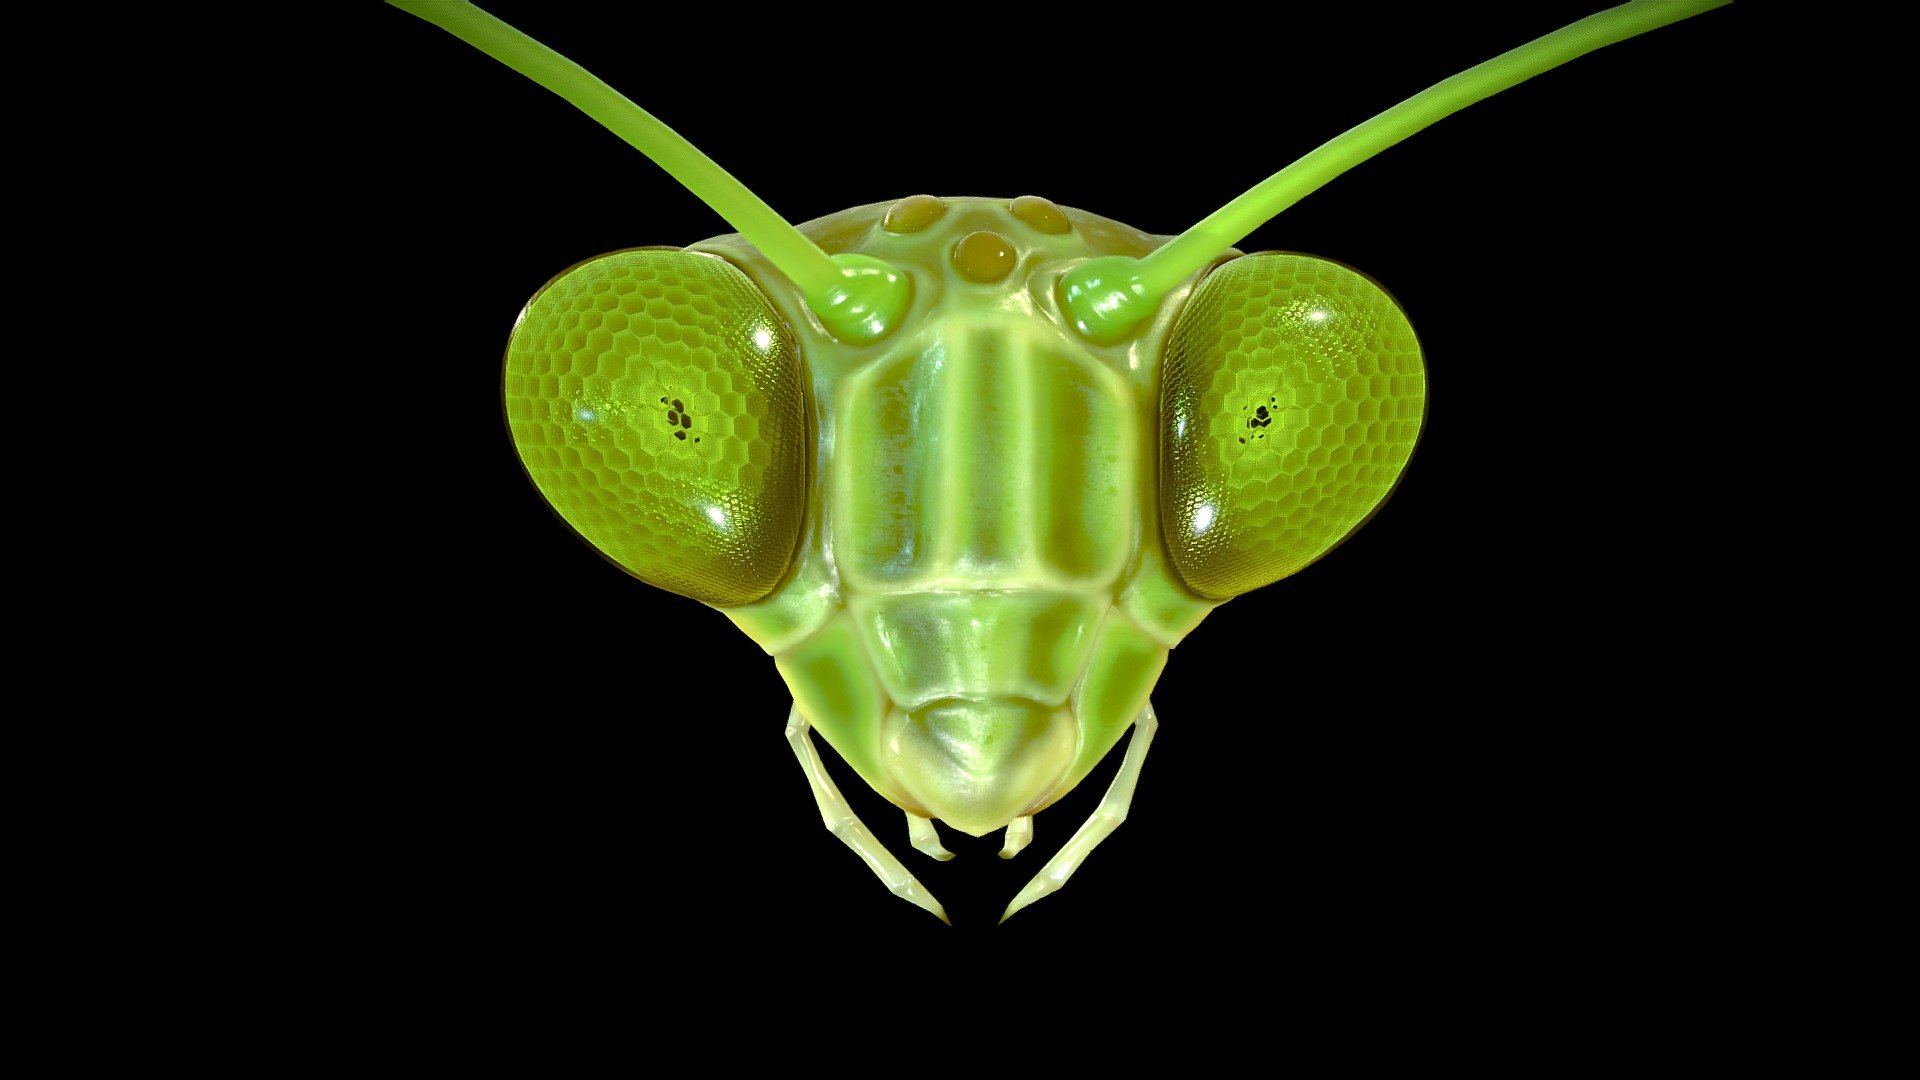 The Praying Mantis Eyes Pseudopupil Buy Royalty Free D Model By Babecraft A Fdde